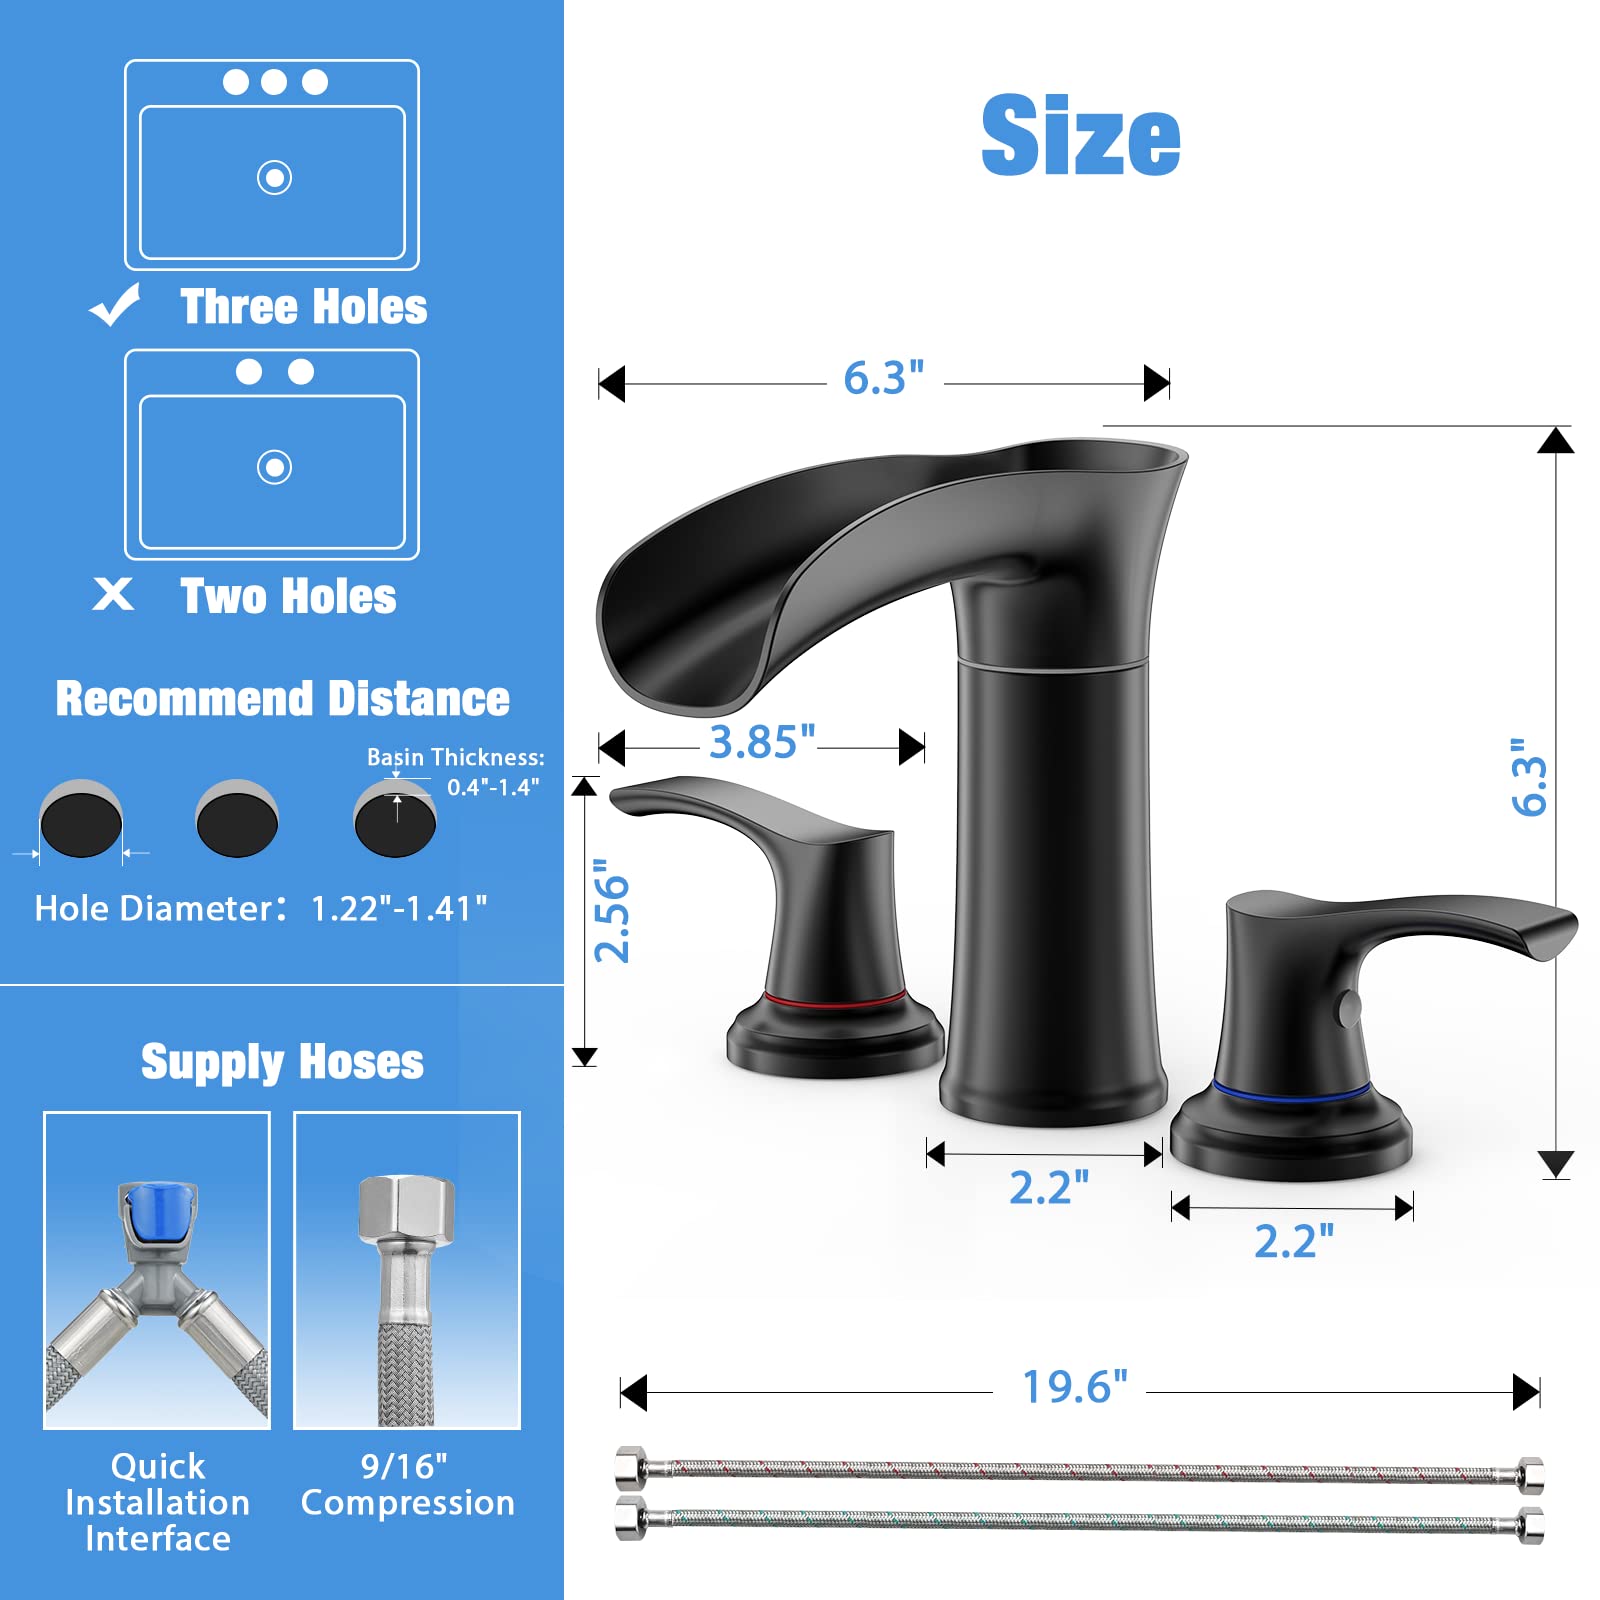 Waterfall Bathroom Faucet, WaterSong 3-Hole 8 Inch Bathroom Sink Faucet for 360-Degree rRotation, 2-Handle Vanity Faucets with Supply Lines, Widespread Spout Faucet for RV Bathroom Sink, Matte Black